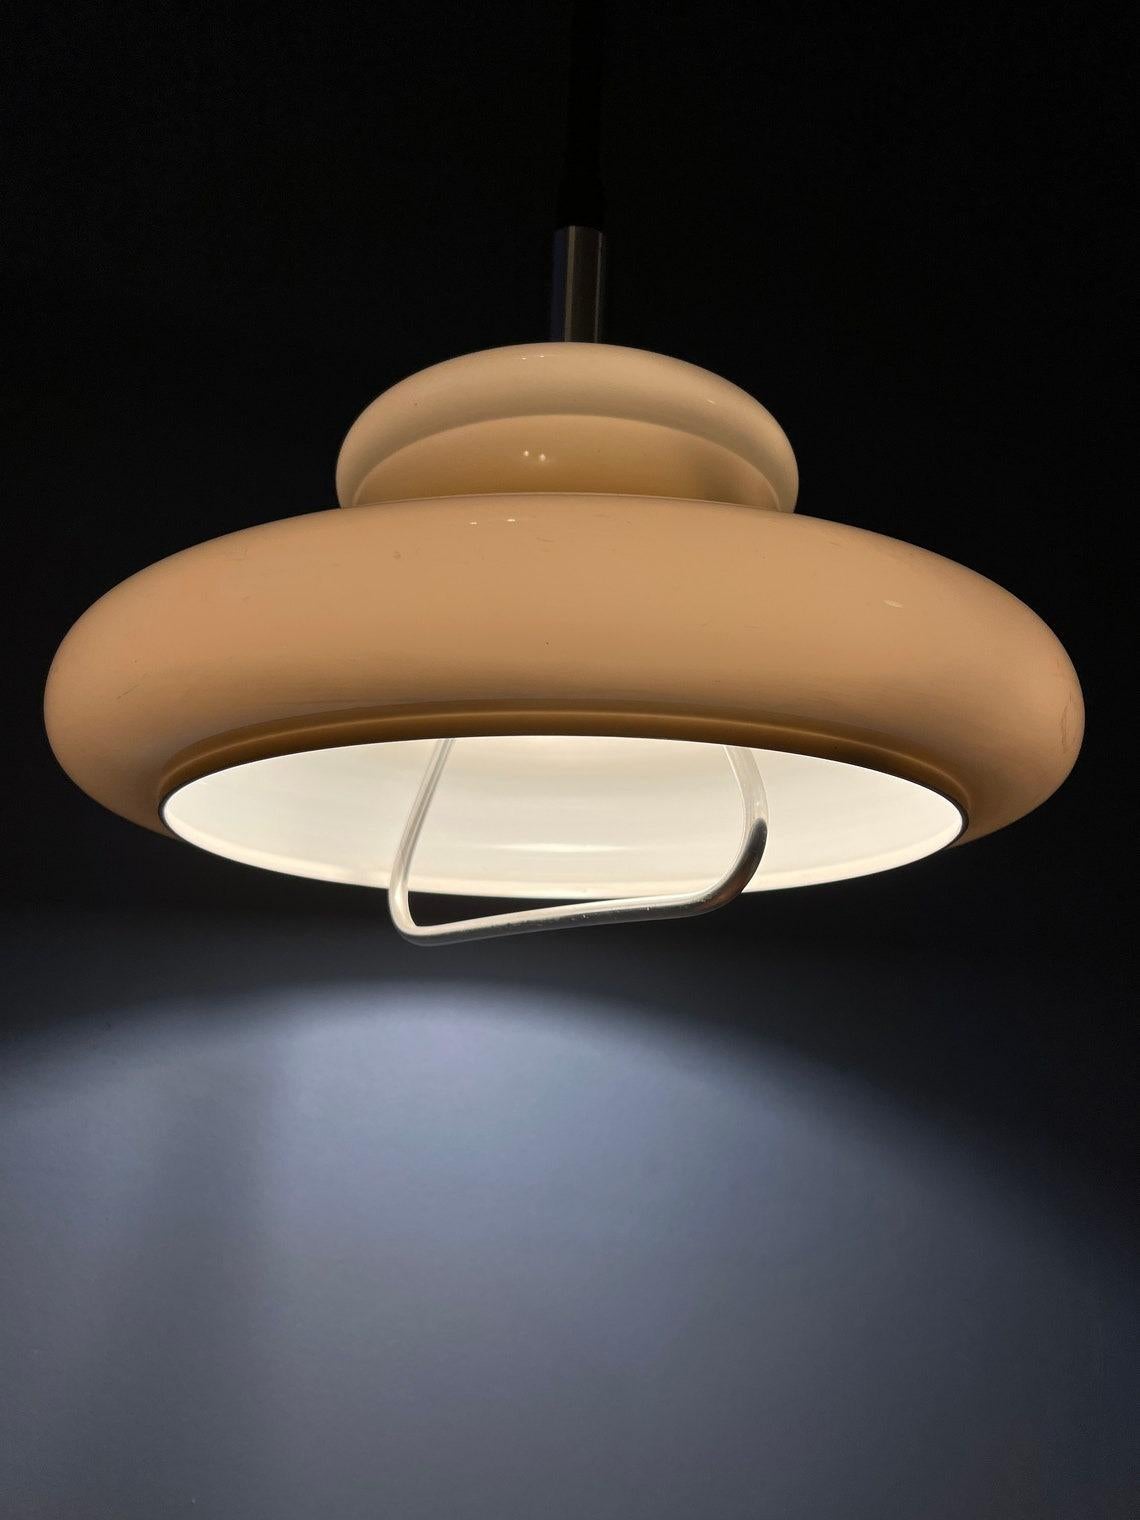 A space age pendant lamp by Herda with a beige, acrylic glass mushroom shade. The height of the lamp can be adjusted with the rise-and-fall system.

Additional information:
Materials: Metal, plastic
Period: 1970s
Dimensions: ø Shade: 35 cm
Height